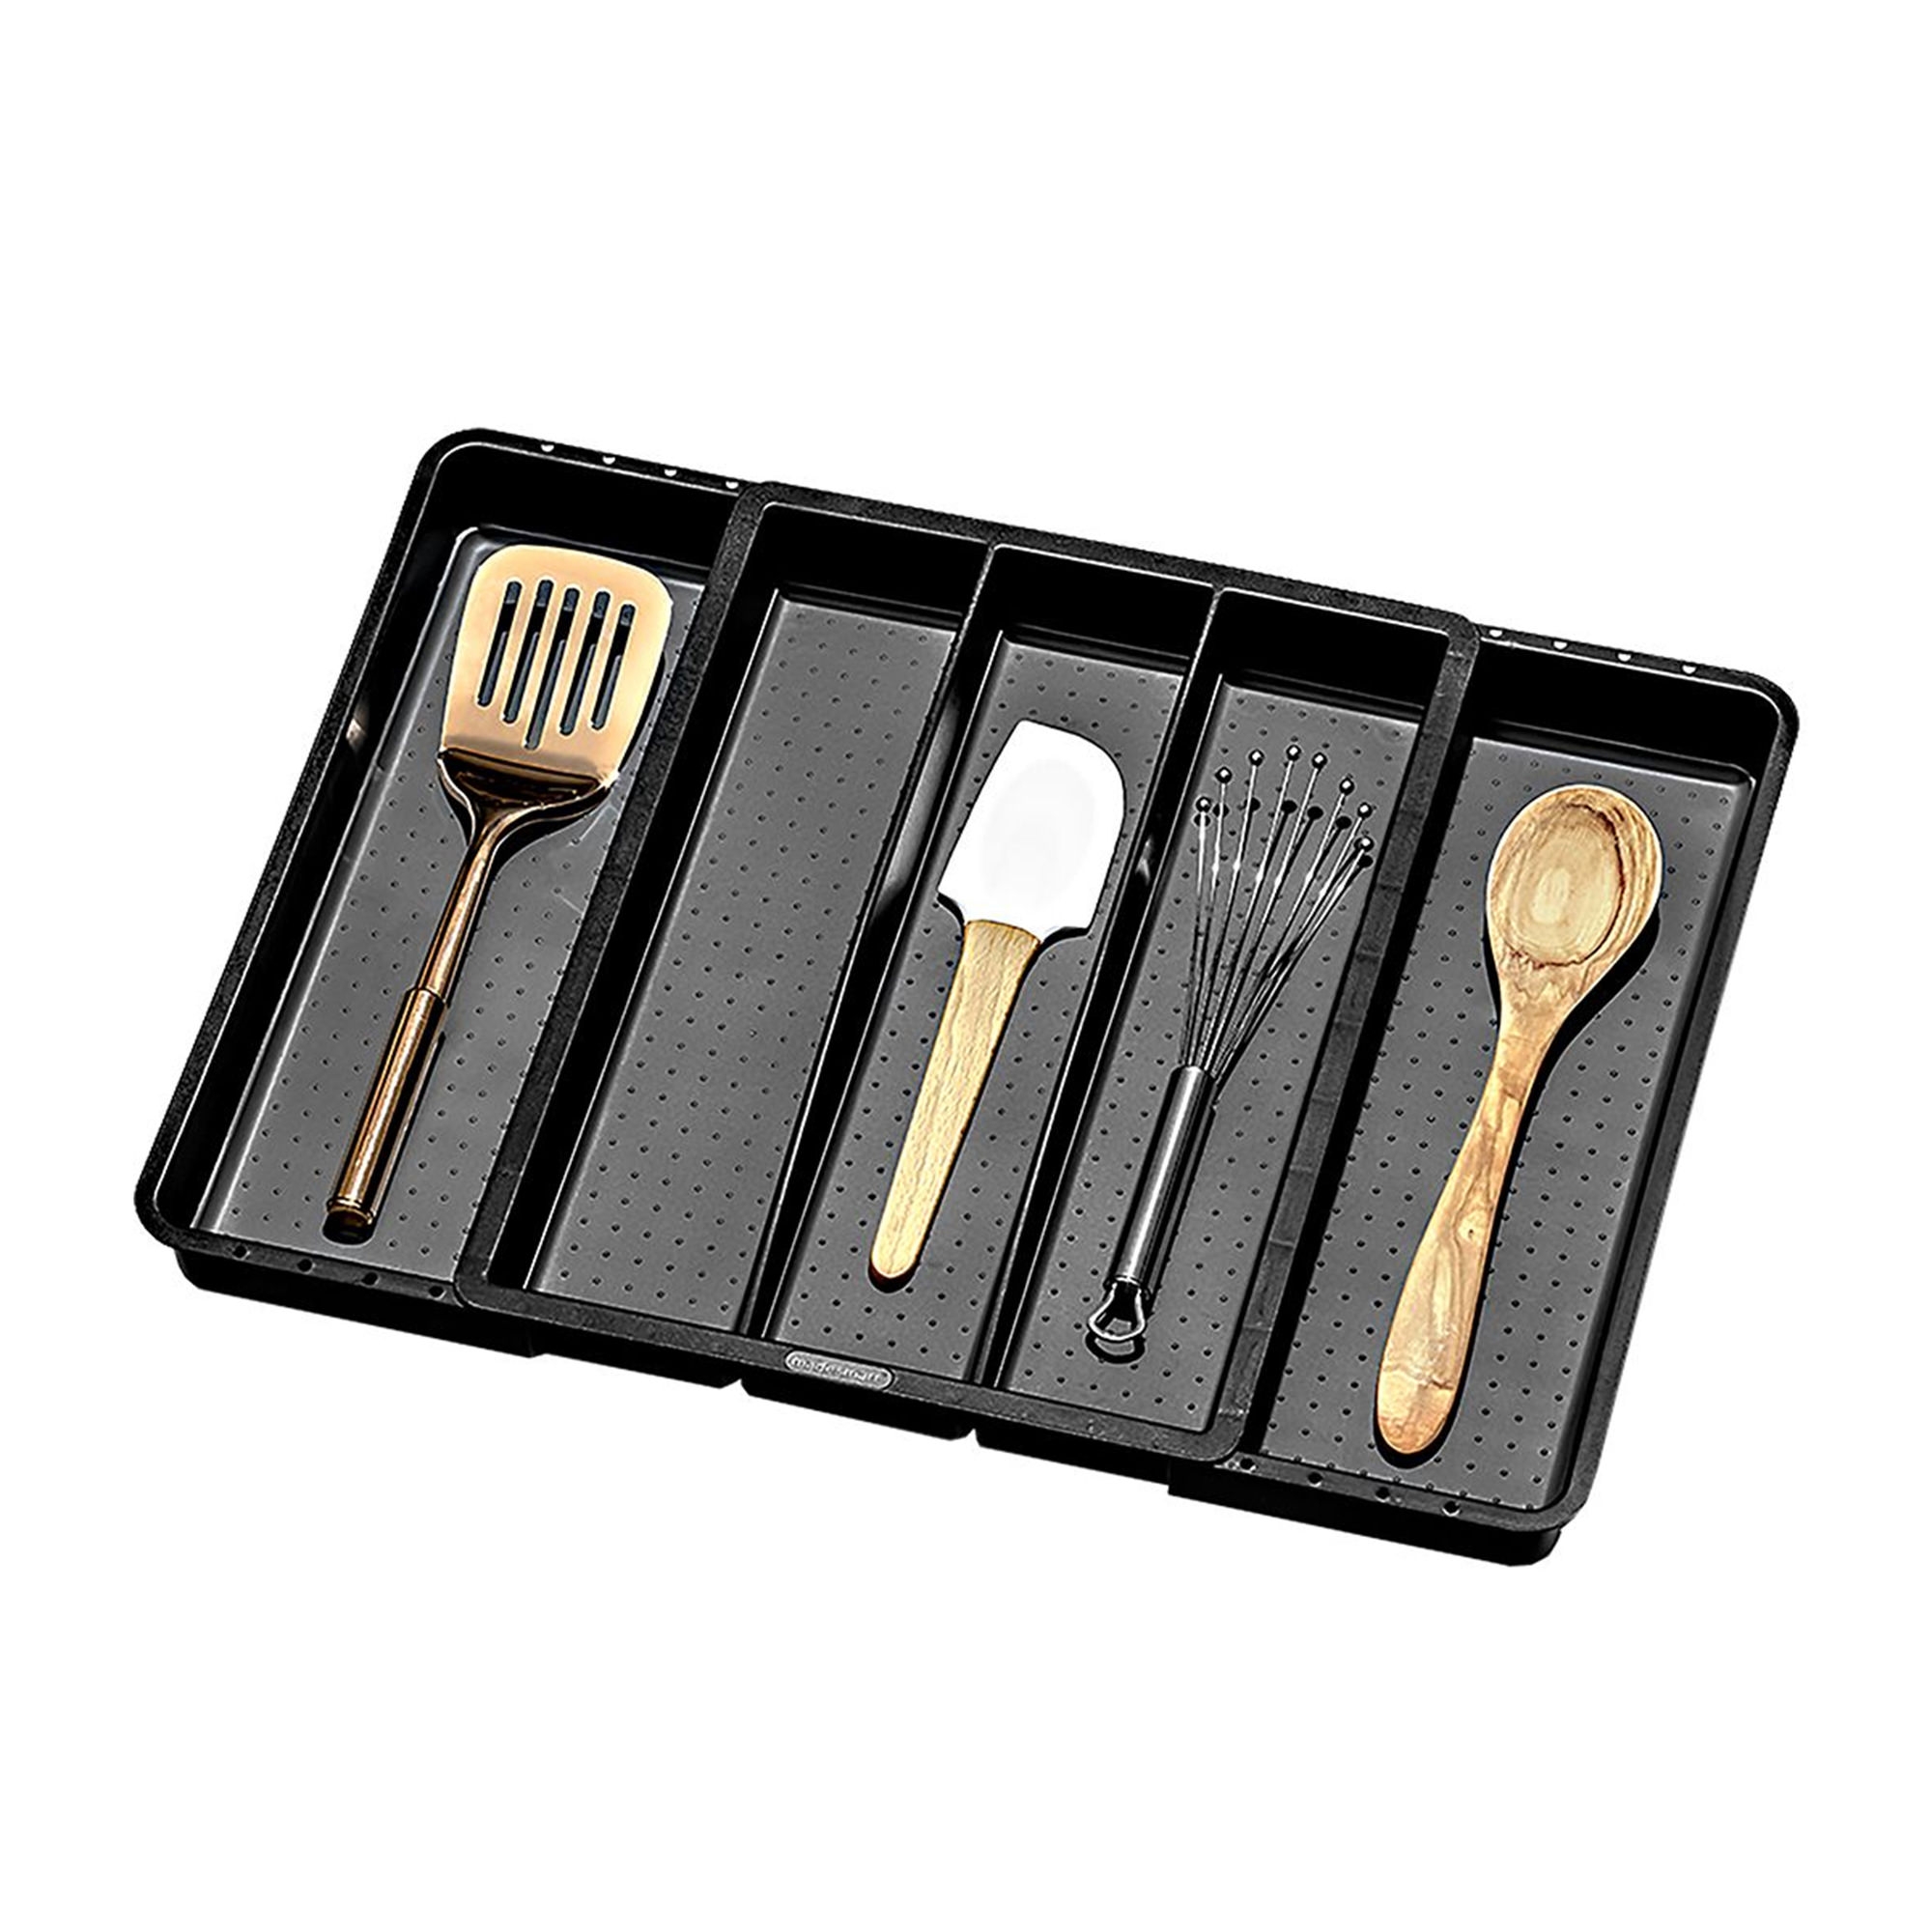 Madesmart Expandable Utensil Tray Carbon Image 1